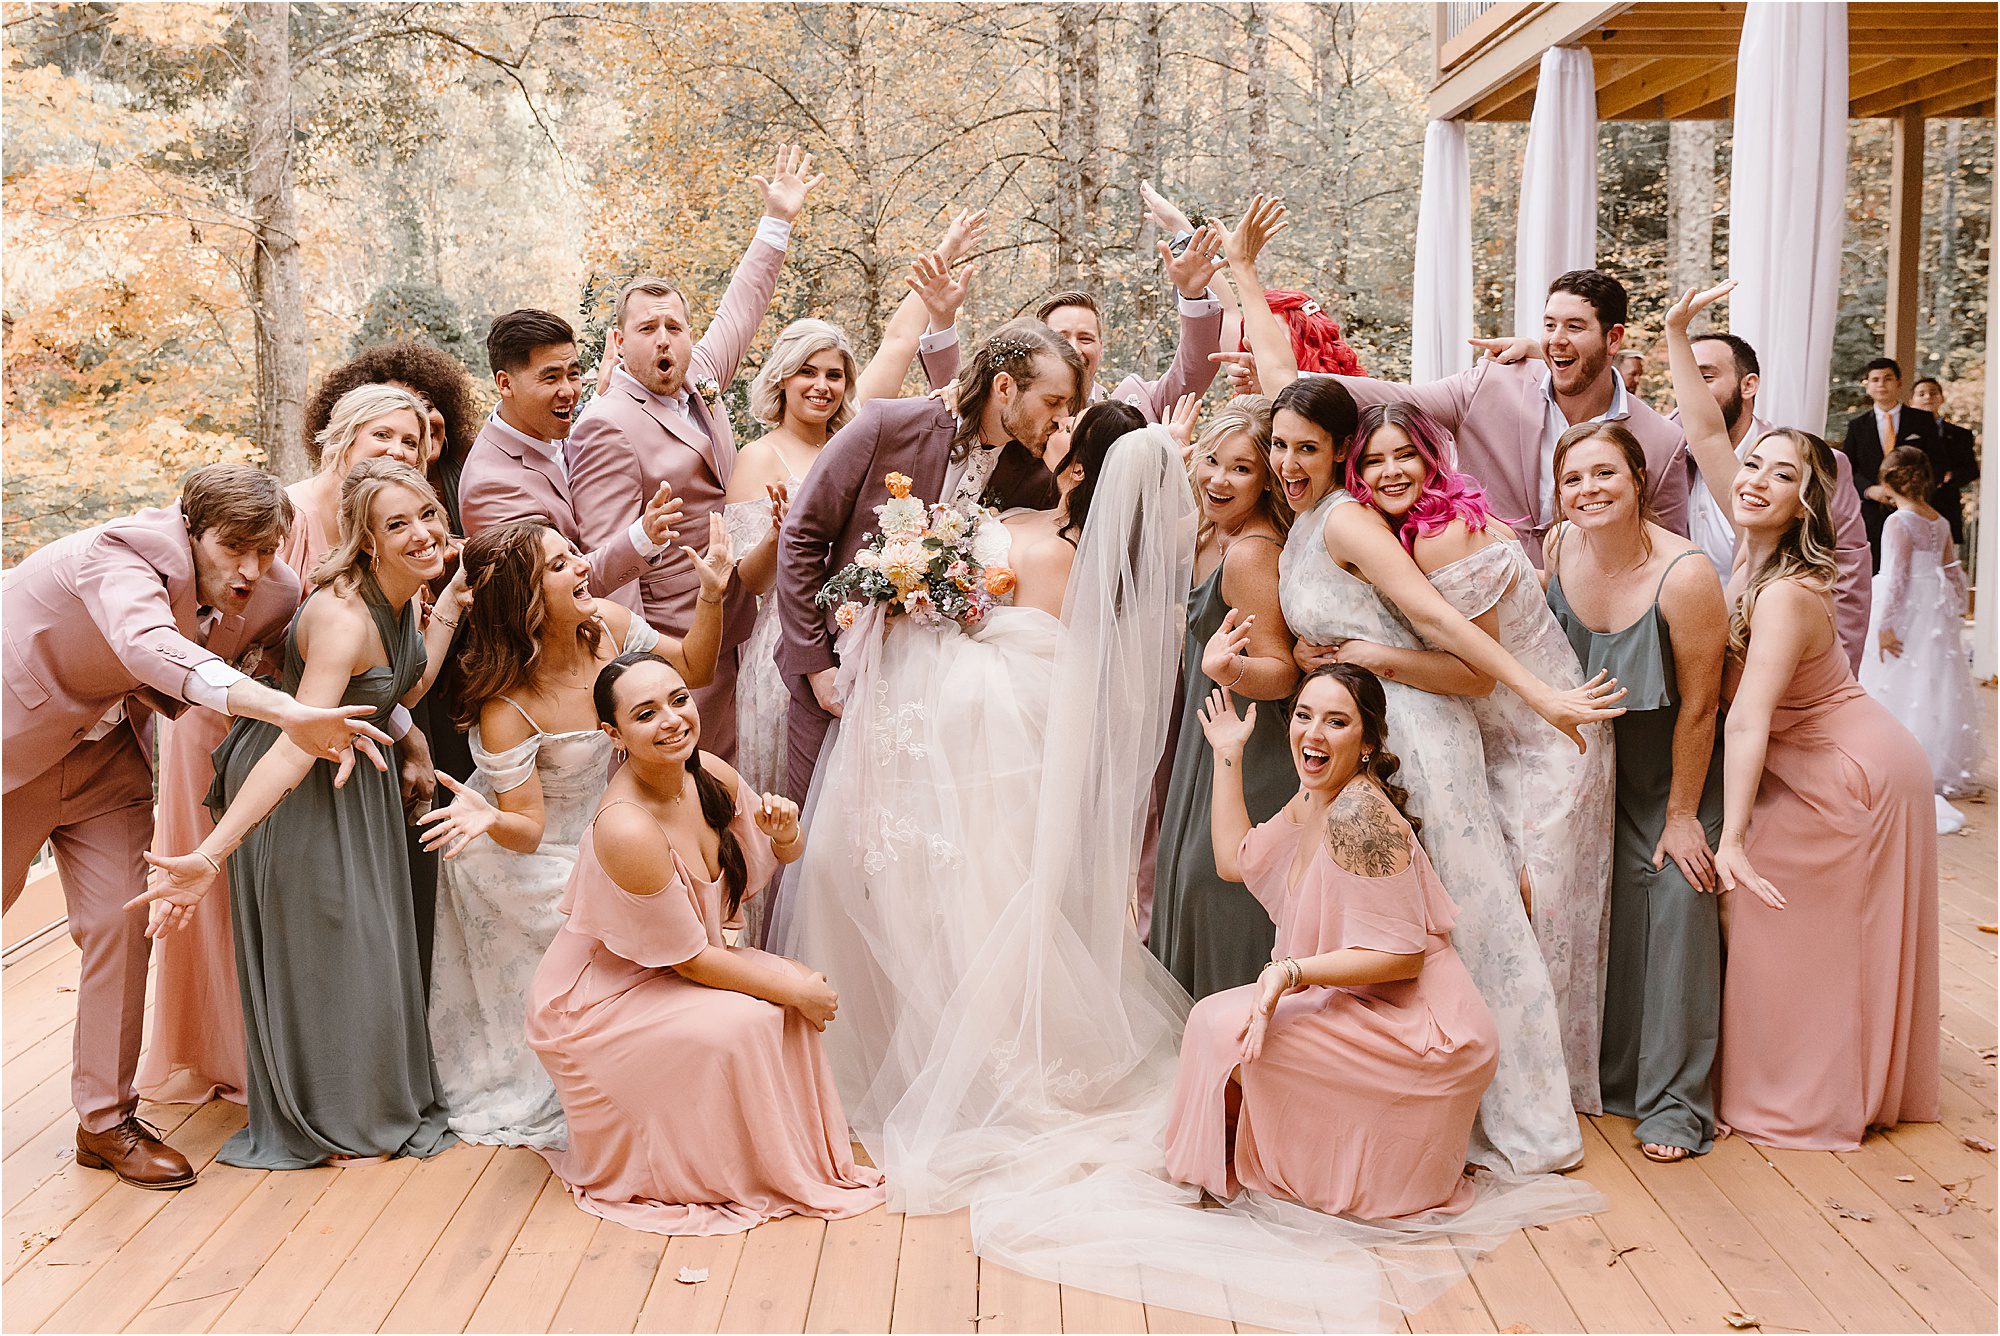 Private Pigeon Forge Wedding is a Modern, Fresh Take on Cabin Weddings